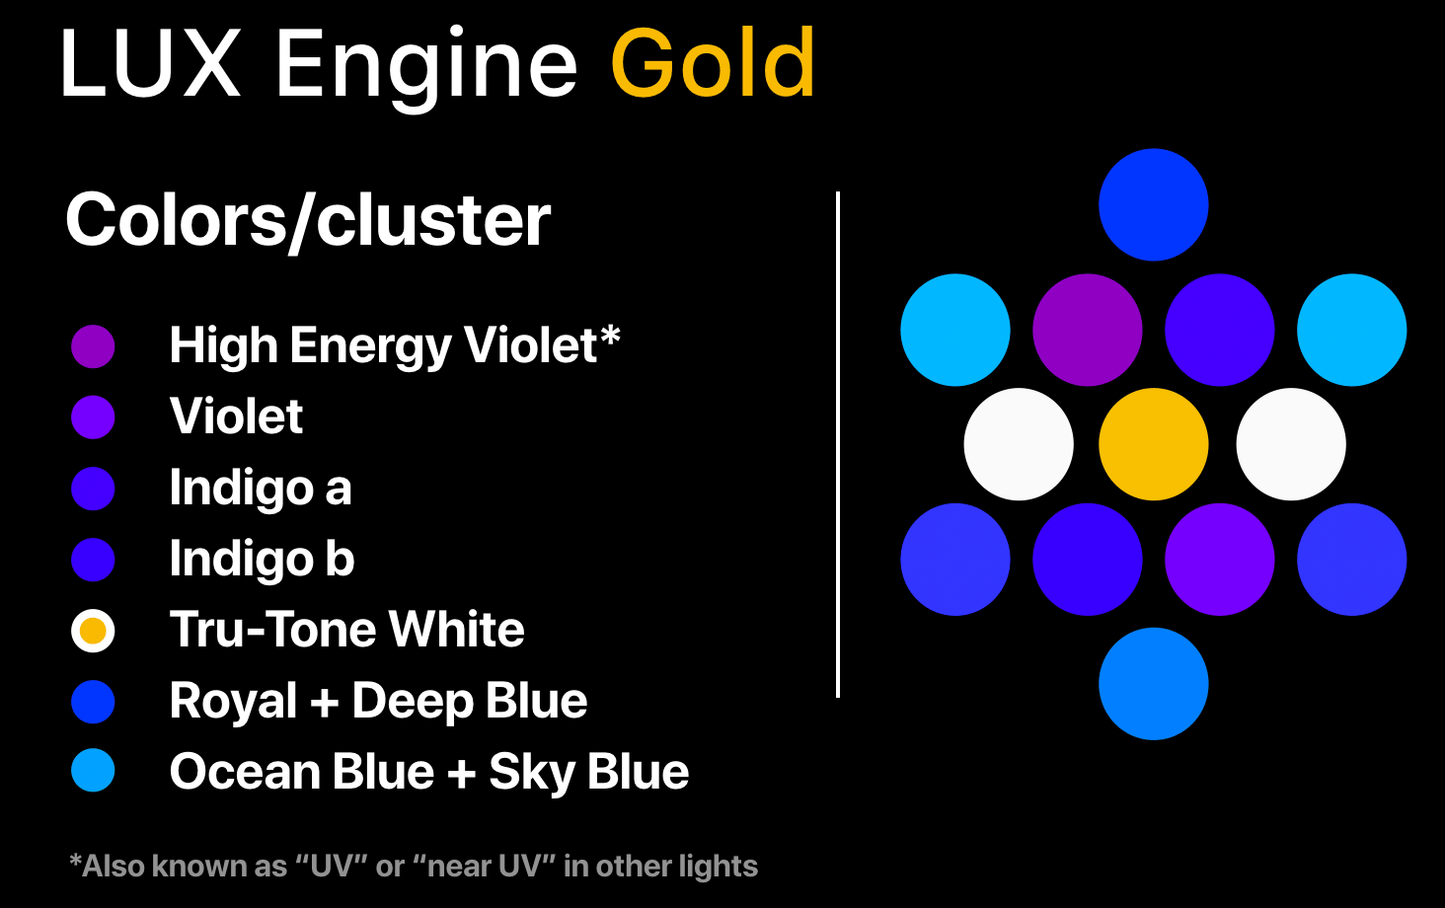 LUX Engine Gold LED Puck Colors